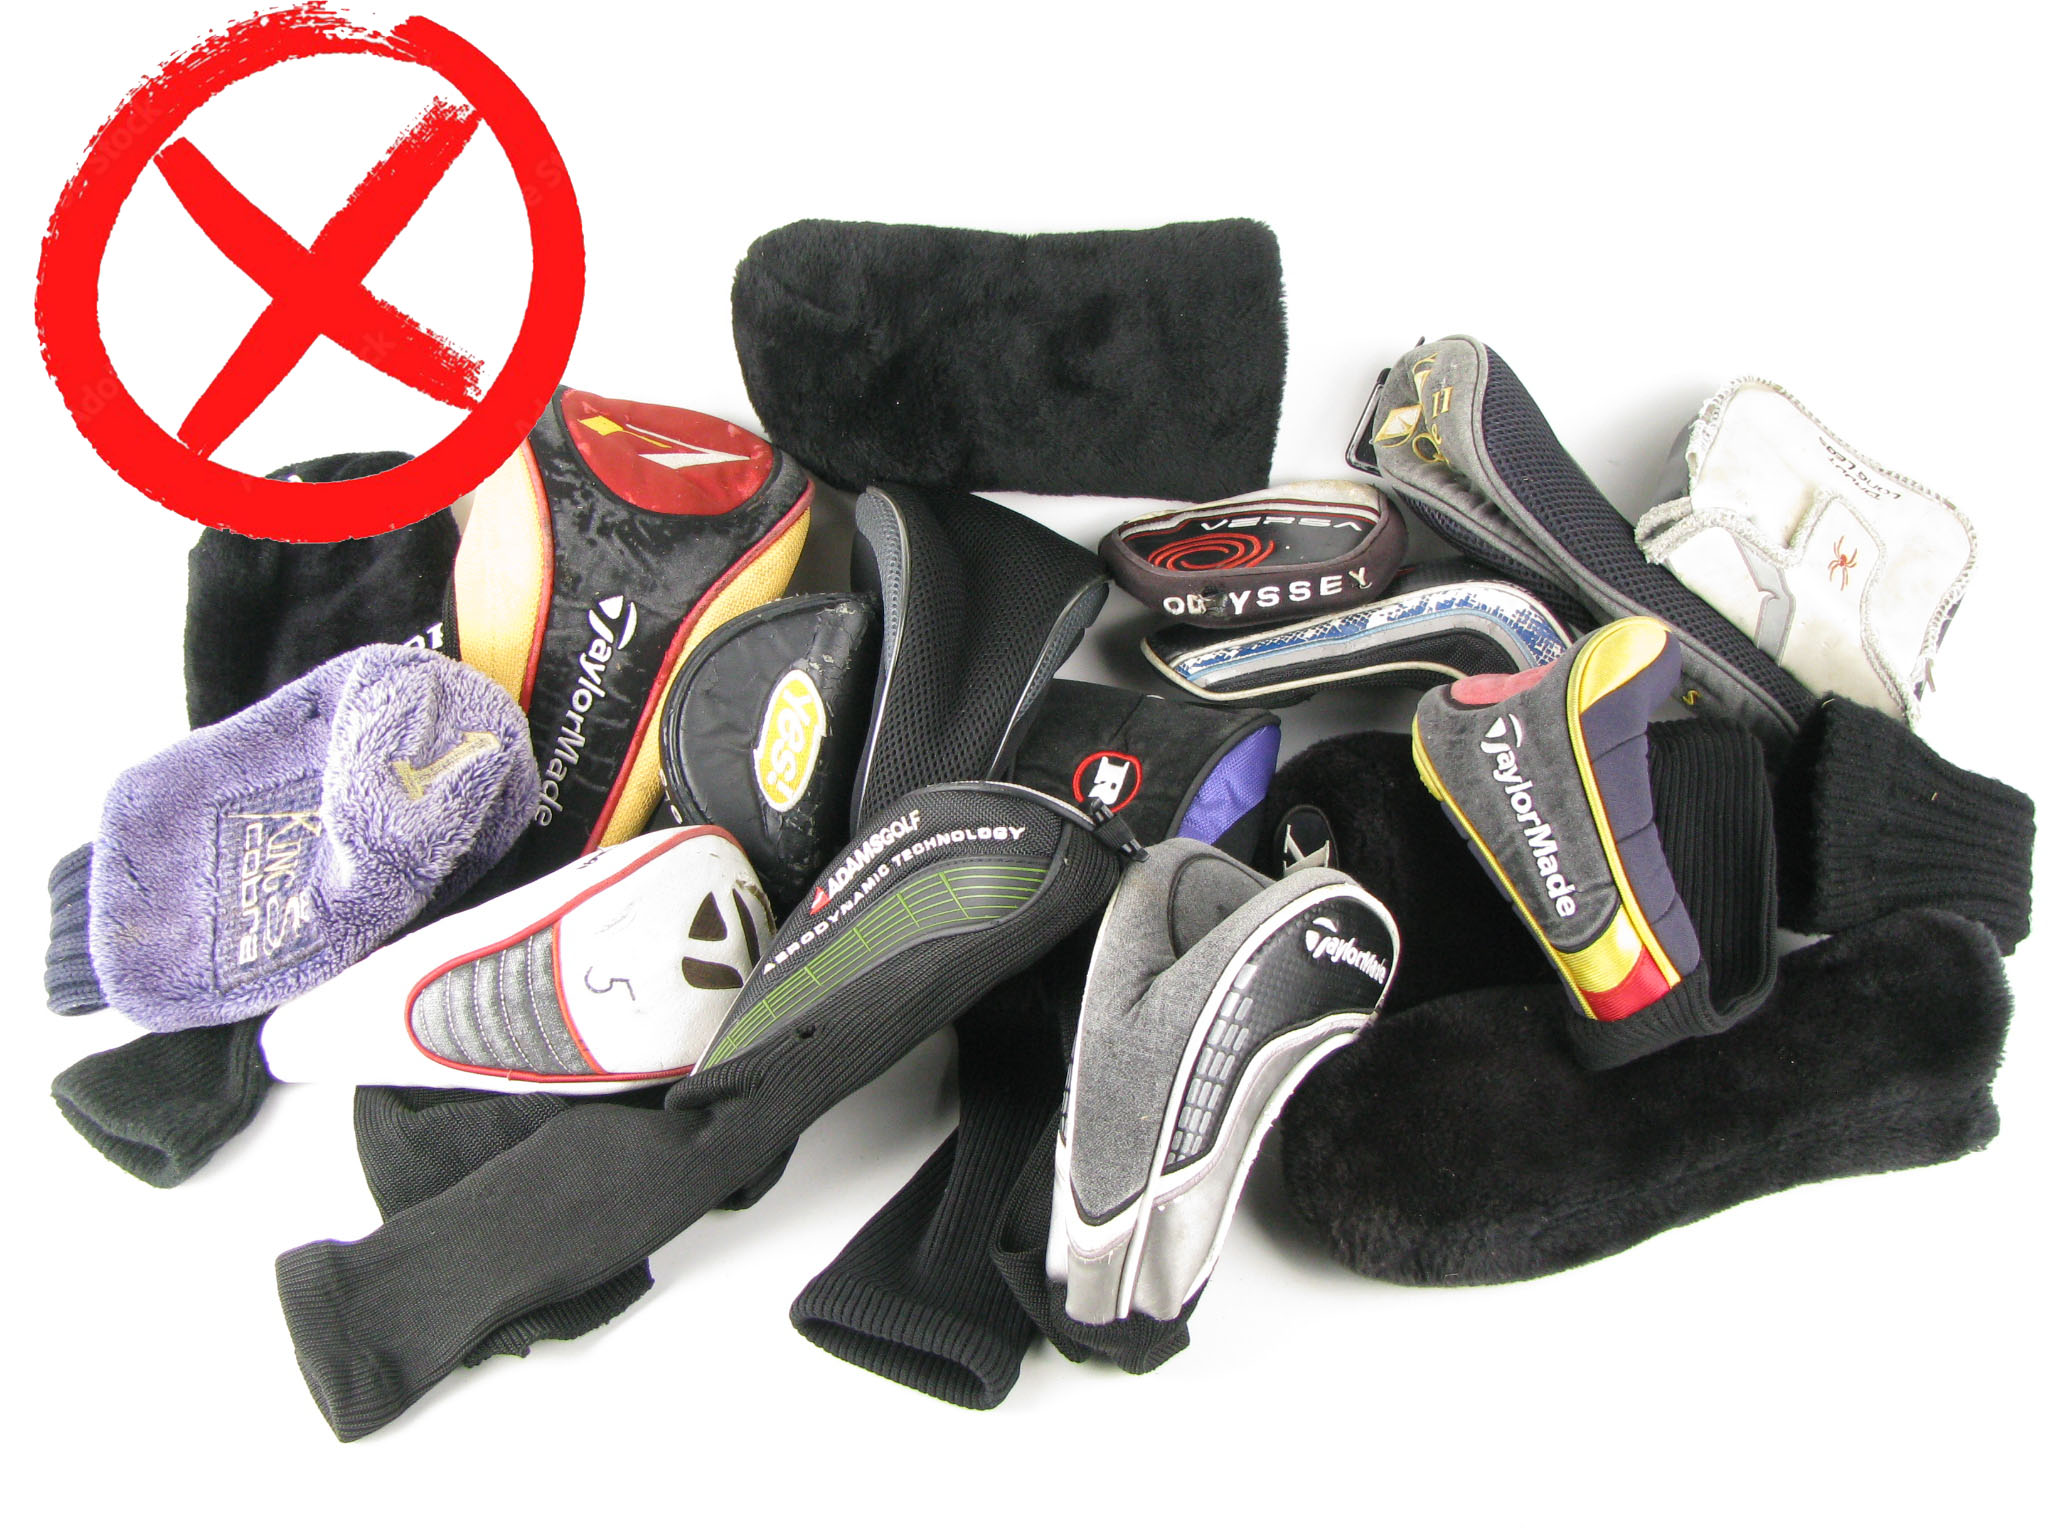 Headcovers we do not purchase